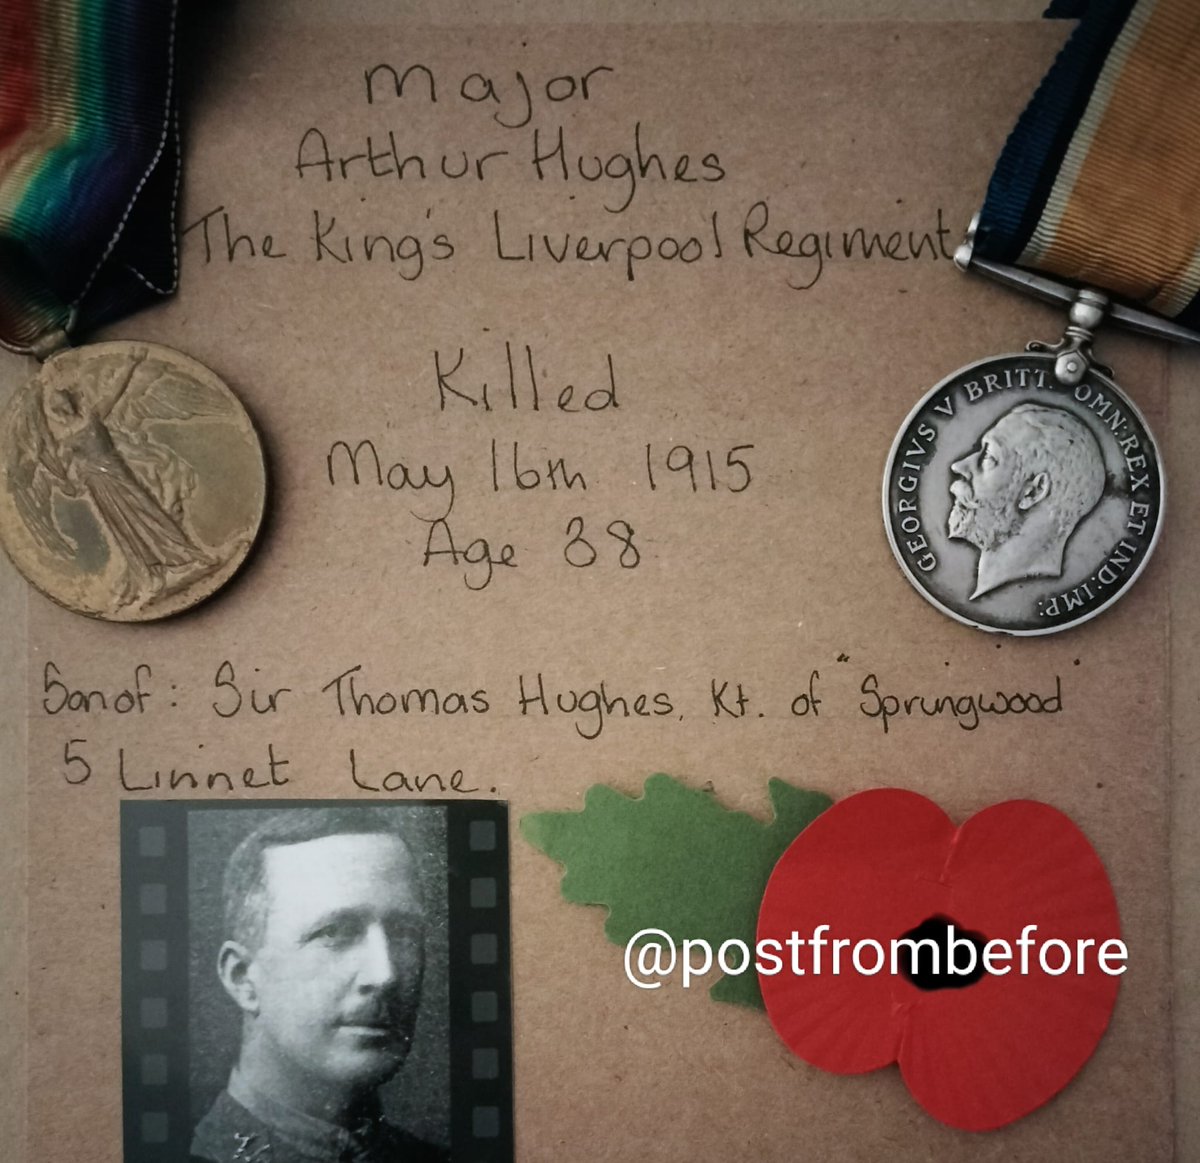 Remembering Arthur Hughes from Springwood, Linnet Lane, Aigburth of the King's Liverpool Regiment who died on 16 May 1915 #LestWeForget, #housethroughtime, #oldliverpool, #aigburth